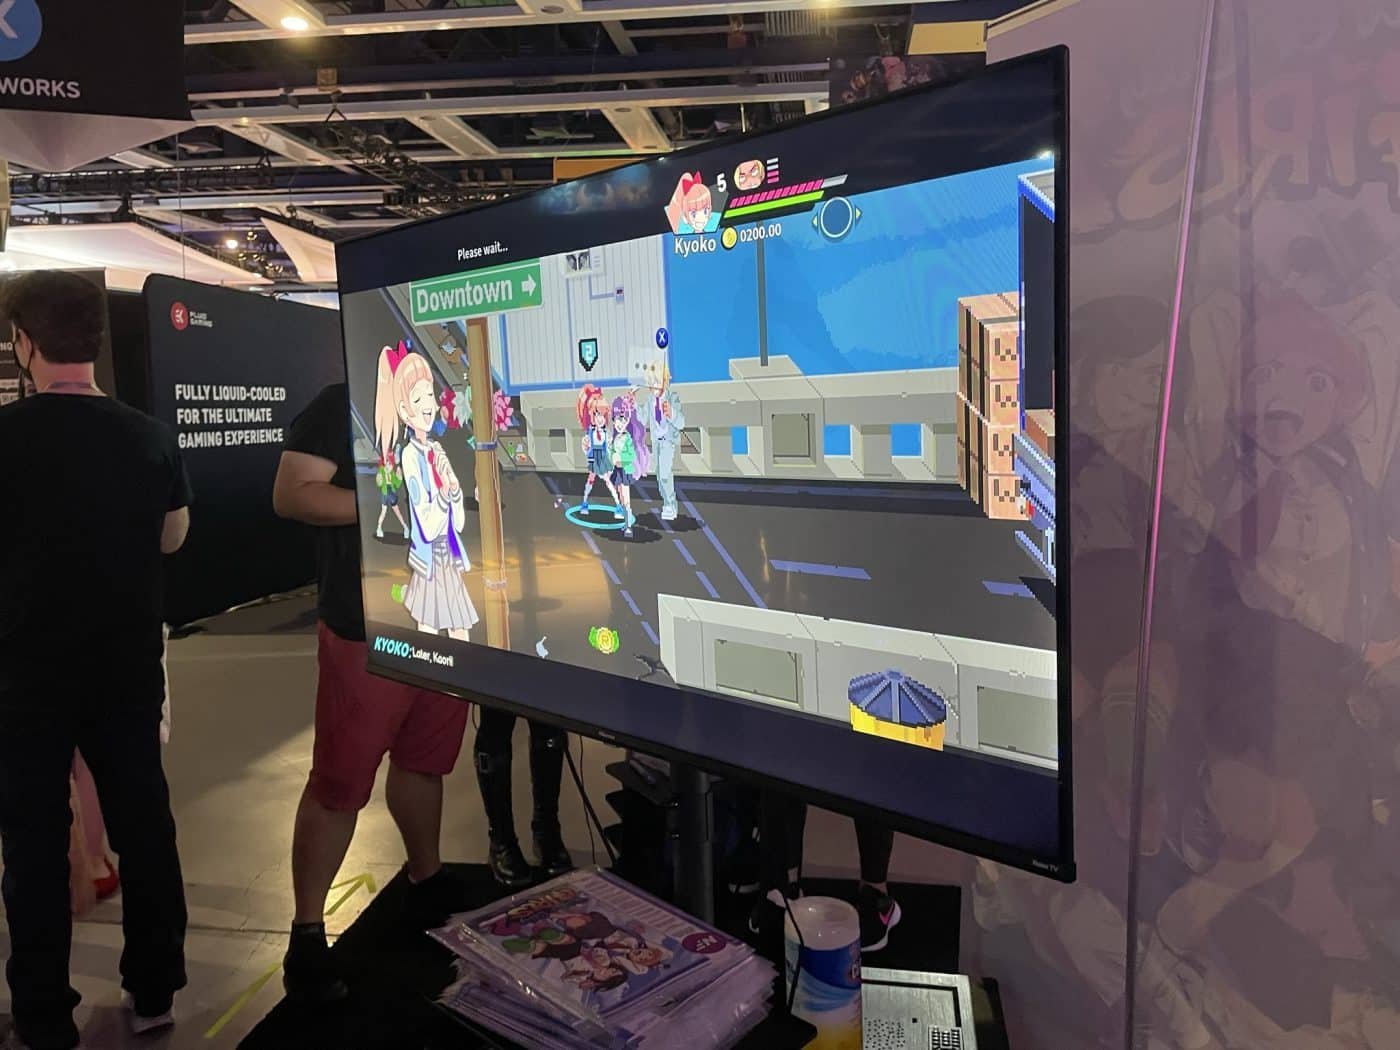 Rivery city girls 2 being demoed at pax west 2022 - pax west 2022 report: wayforward and limited run games